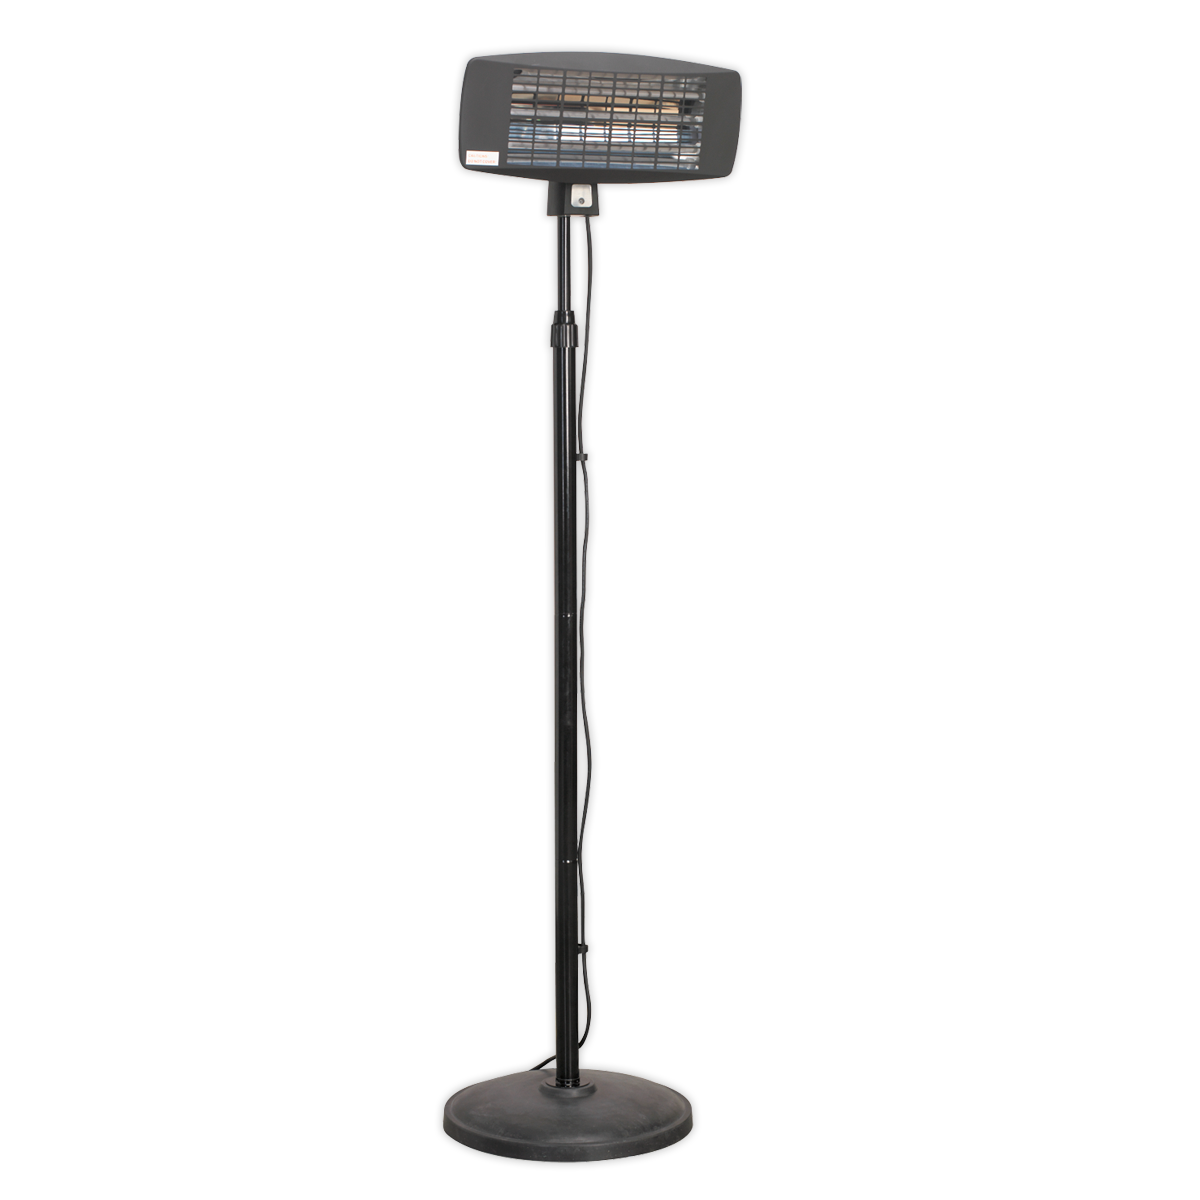 Sealey IFSH2003 Infrared Quartz Patio Heater 2000W/230V with Telescopic Floor Stand